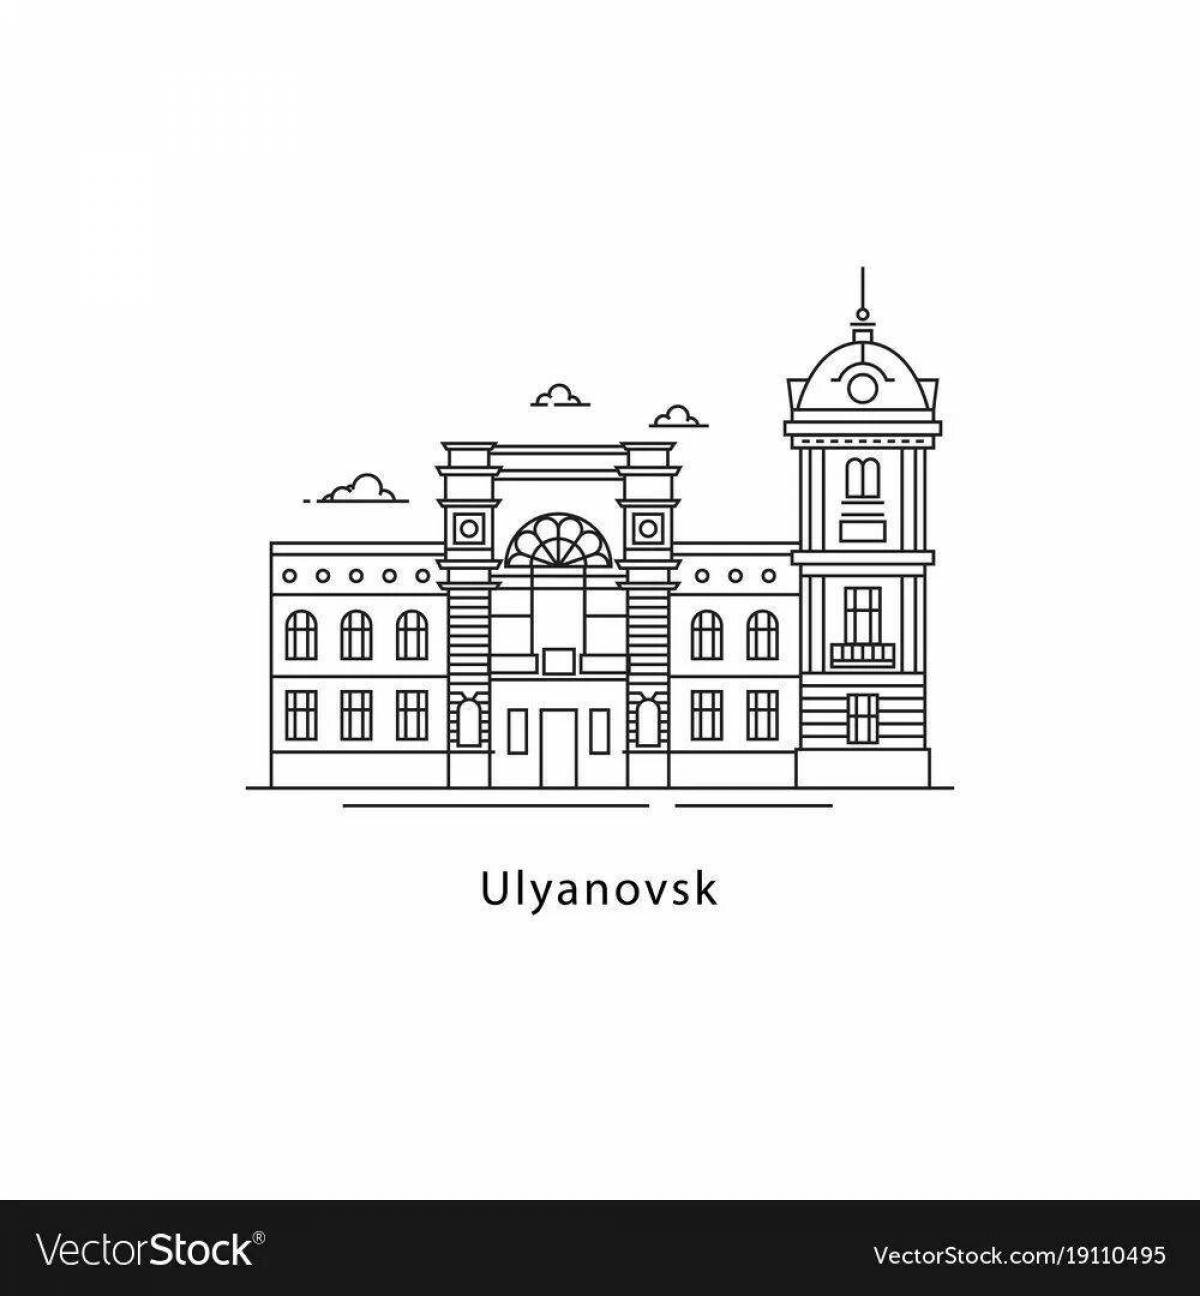 Amazing coloring pages sights of Ulyanovsk